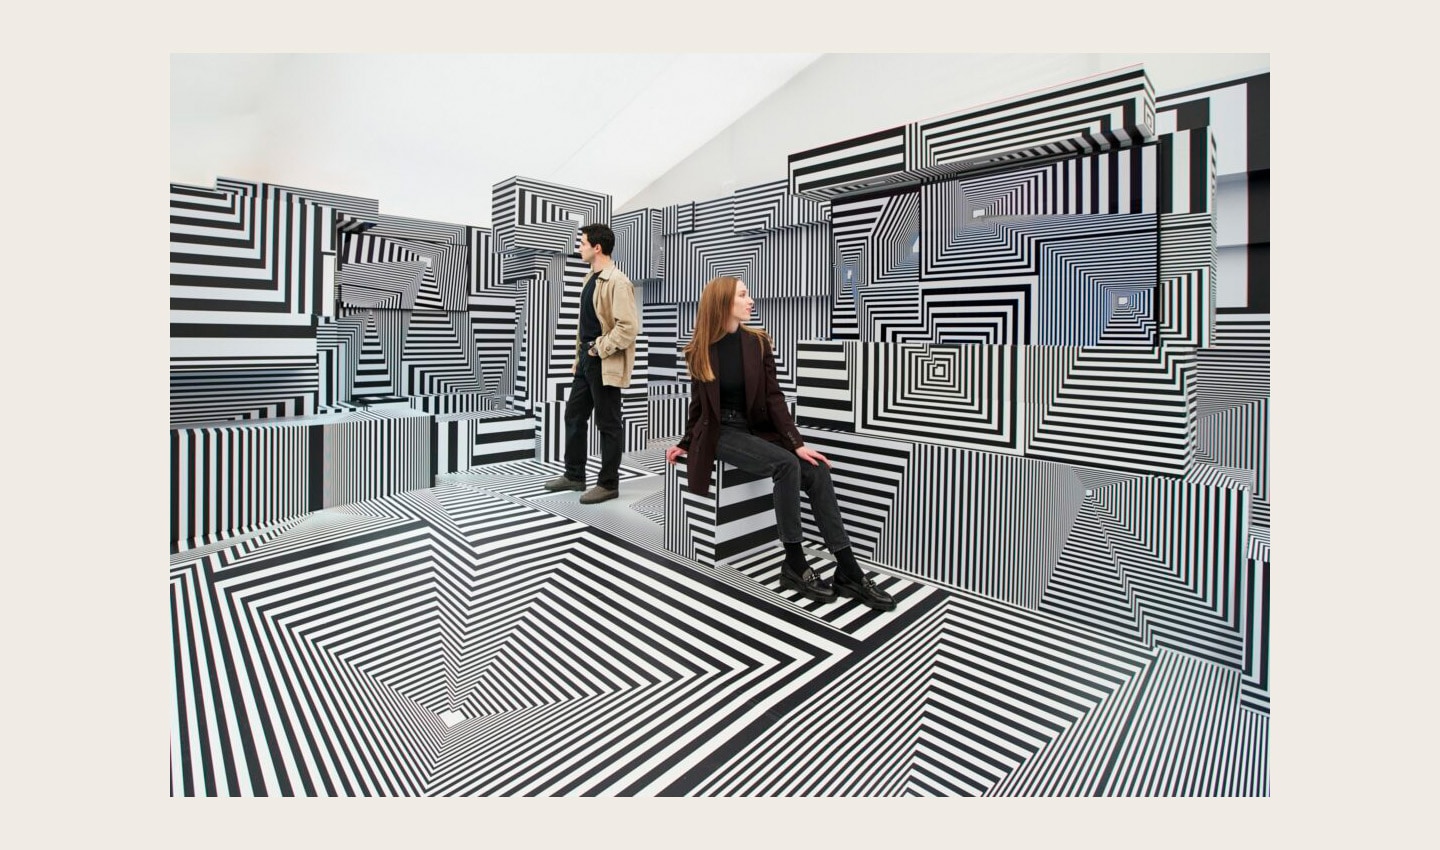 Two visitors posing at LG OLED-powered “Into the Maze” installation by the German artist, Tobias Rehberger